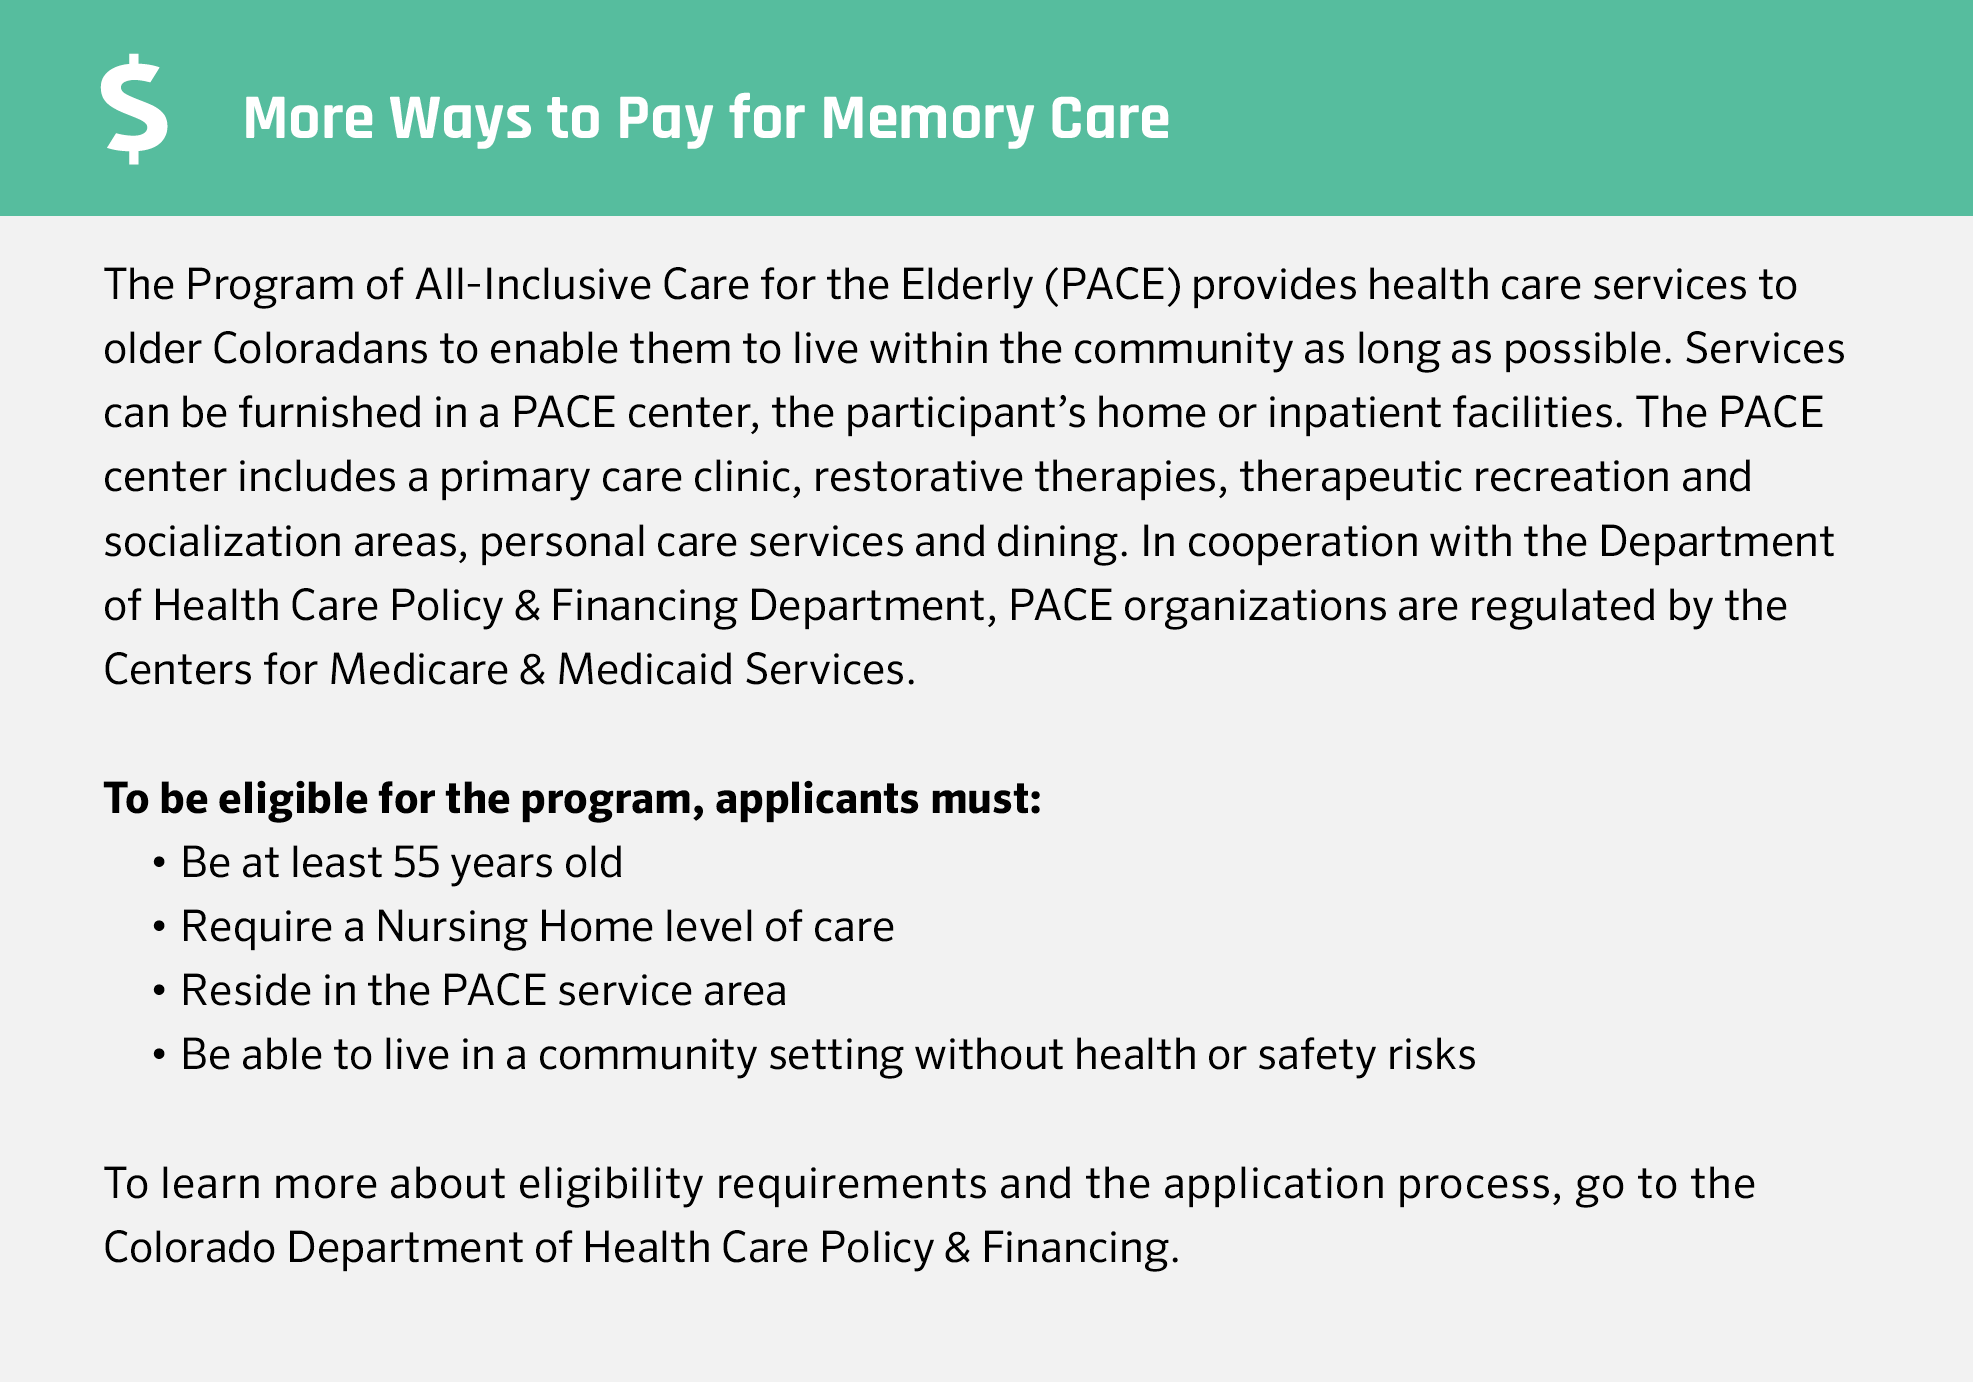 Financial Assistance for Memory Care in Colorado